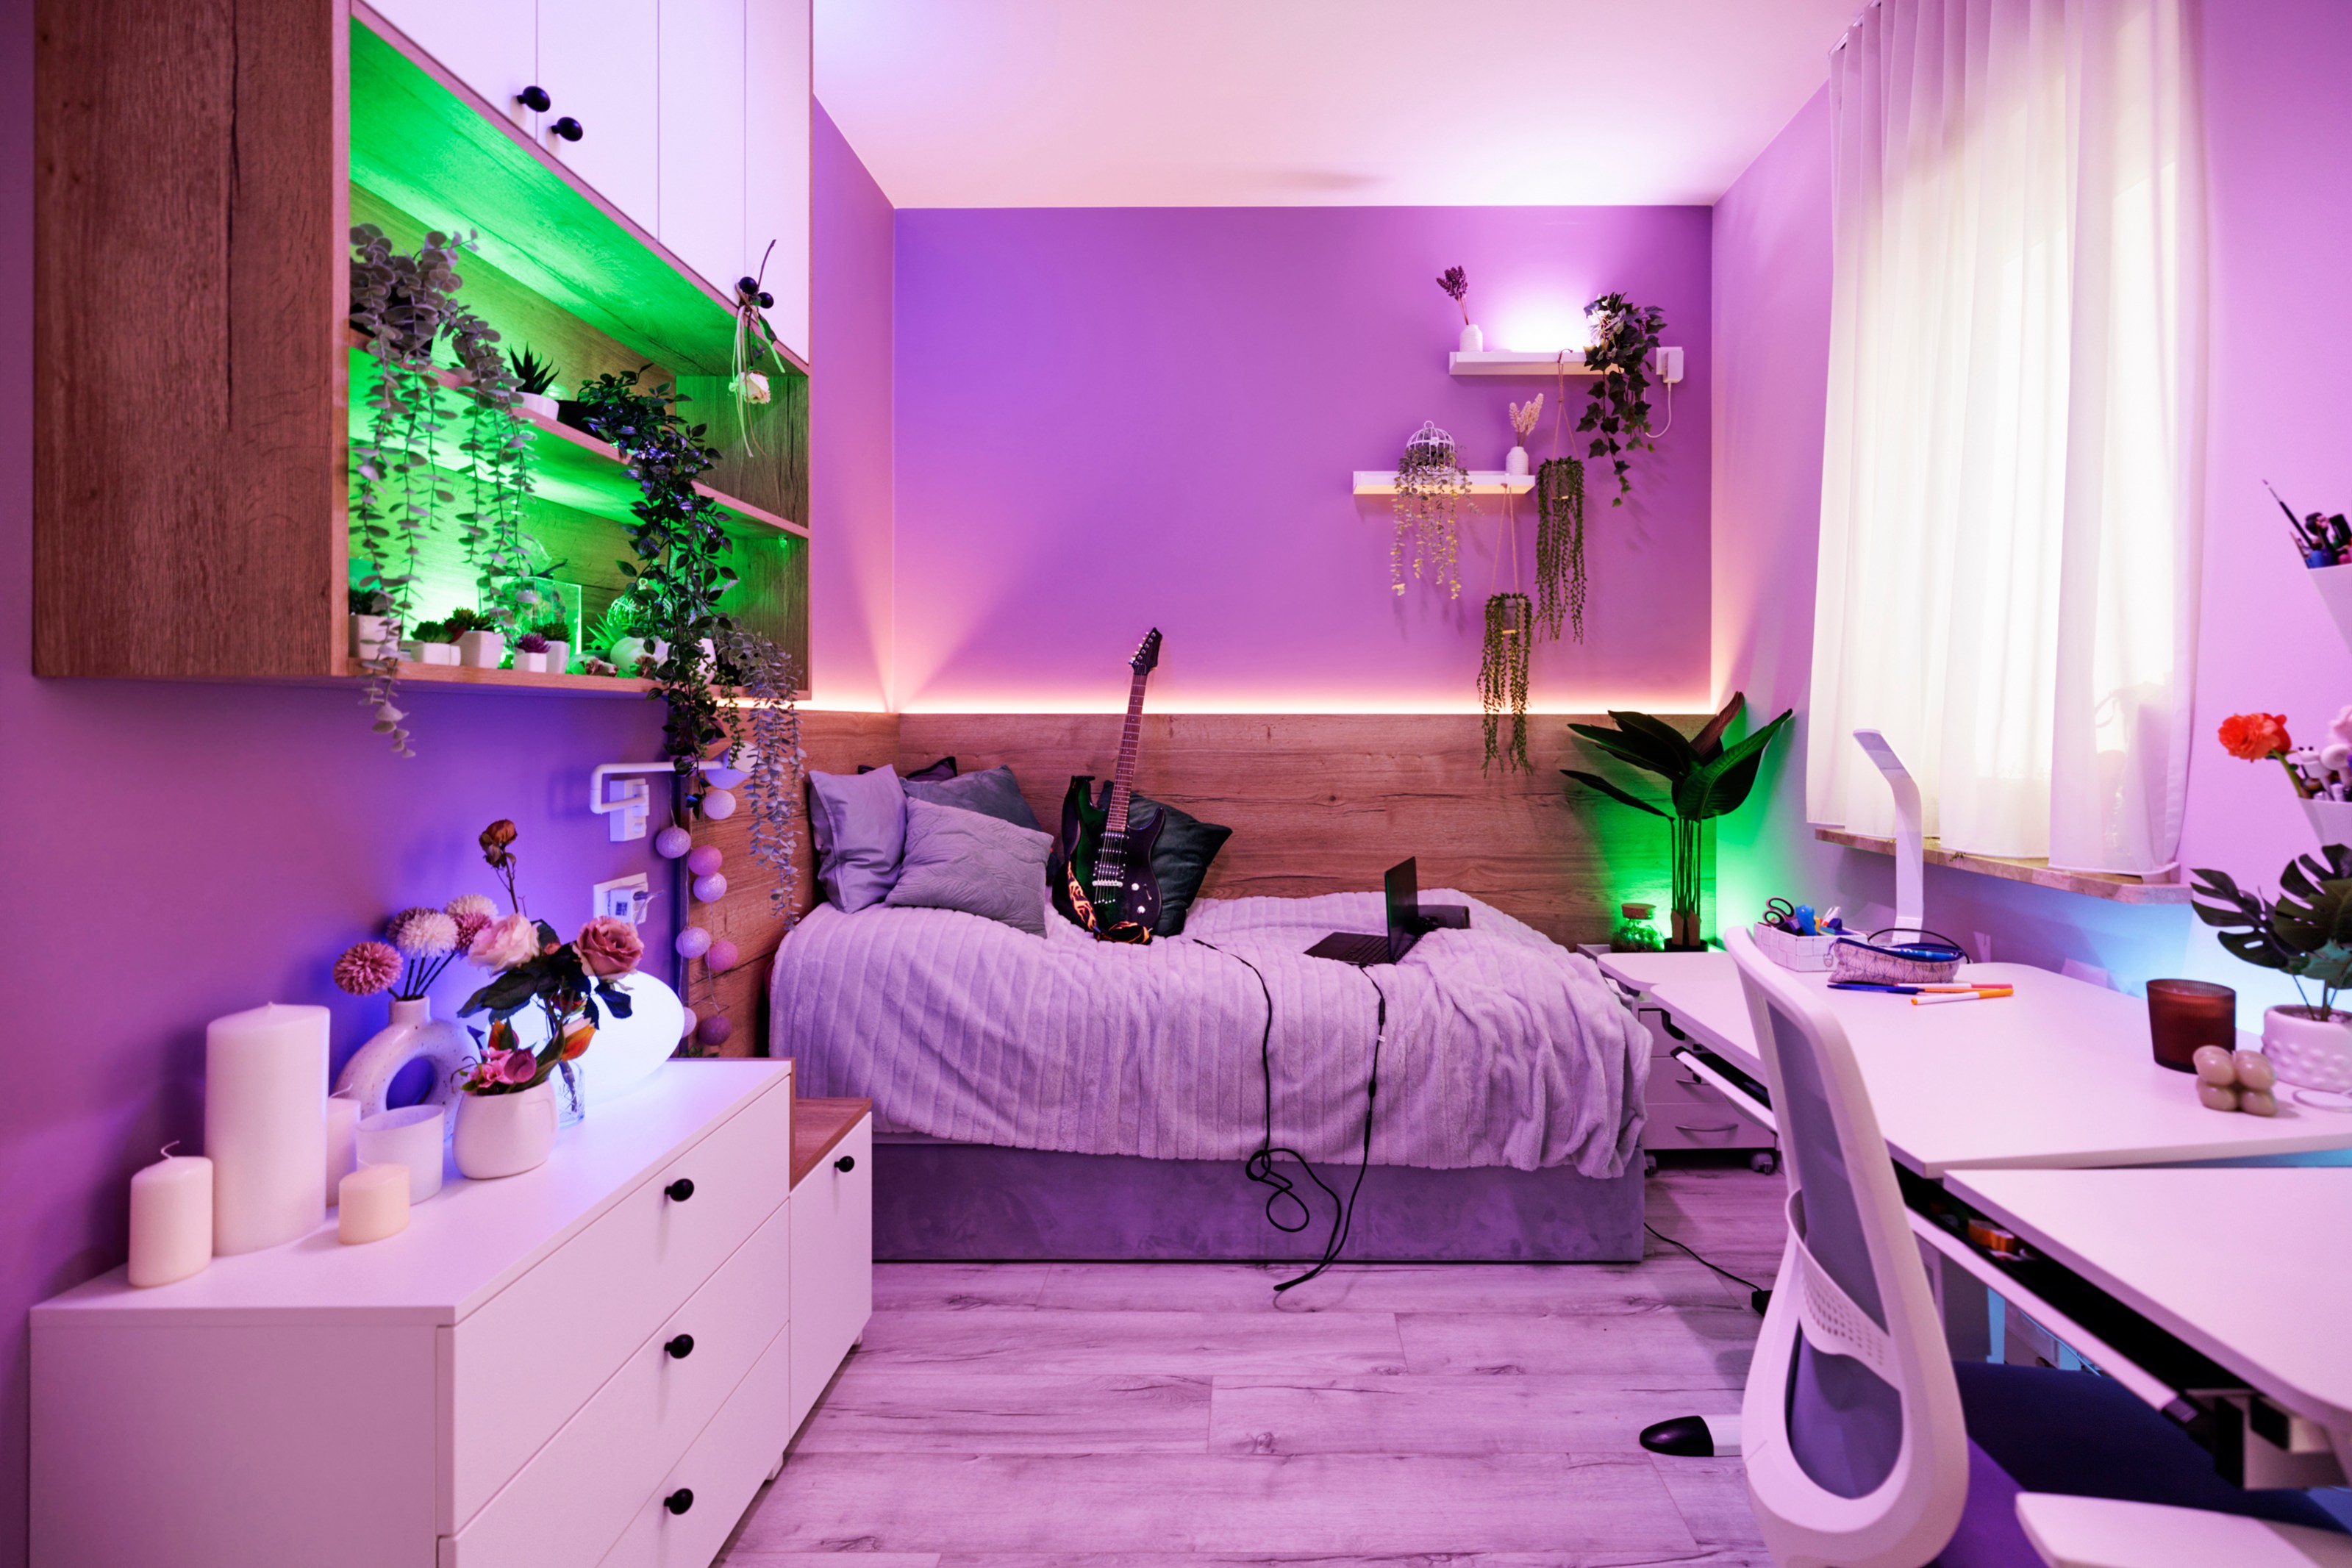 Very personalized gen-z bedroom with lots of storage that is transformed by colorful lighting.